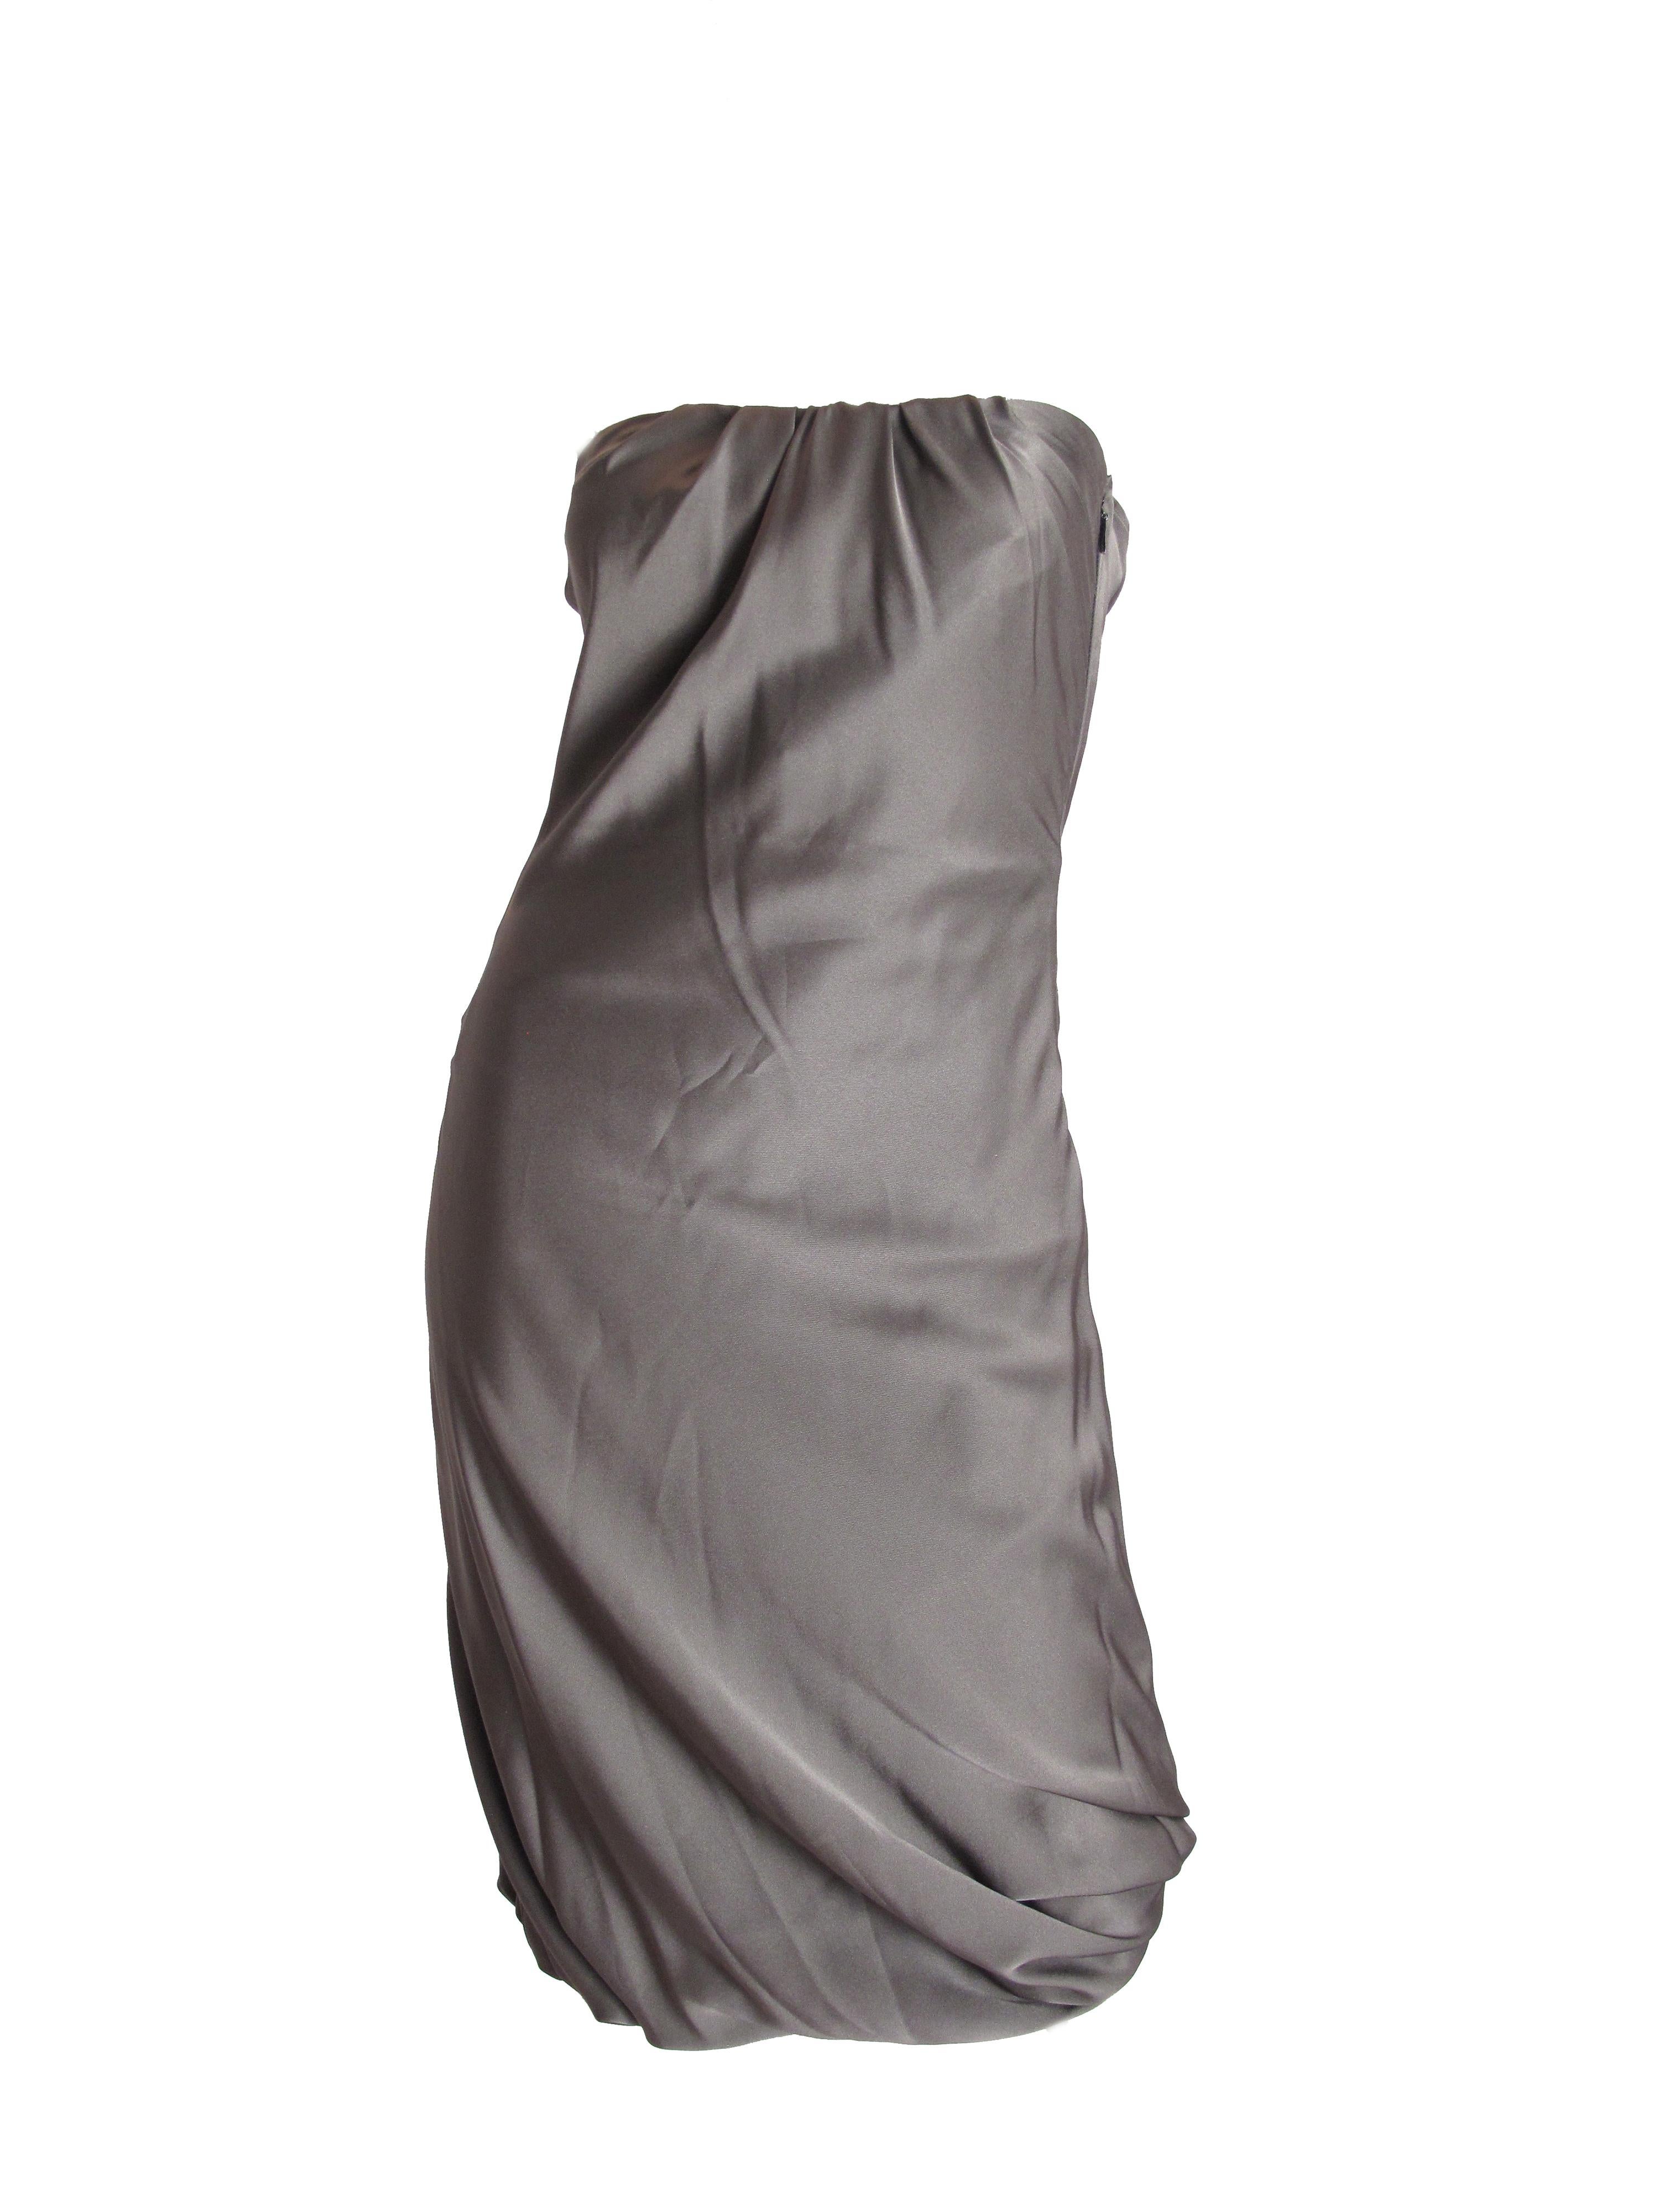 Gucci by Tom Ford brown strapless silk dress. Condition: Excellent. Size XS / US 2, IT 38

26